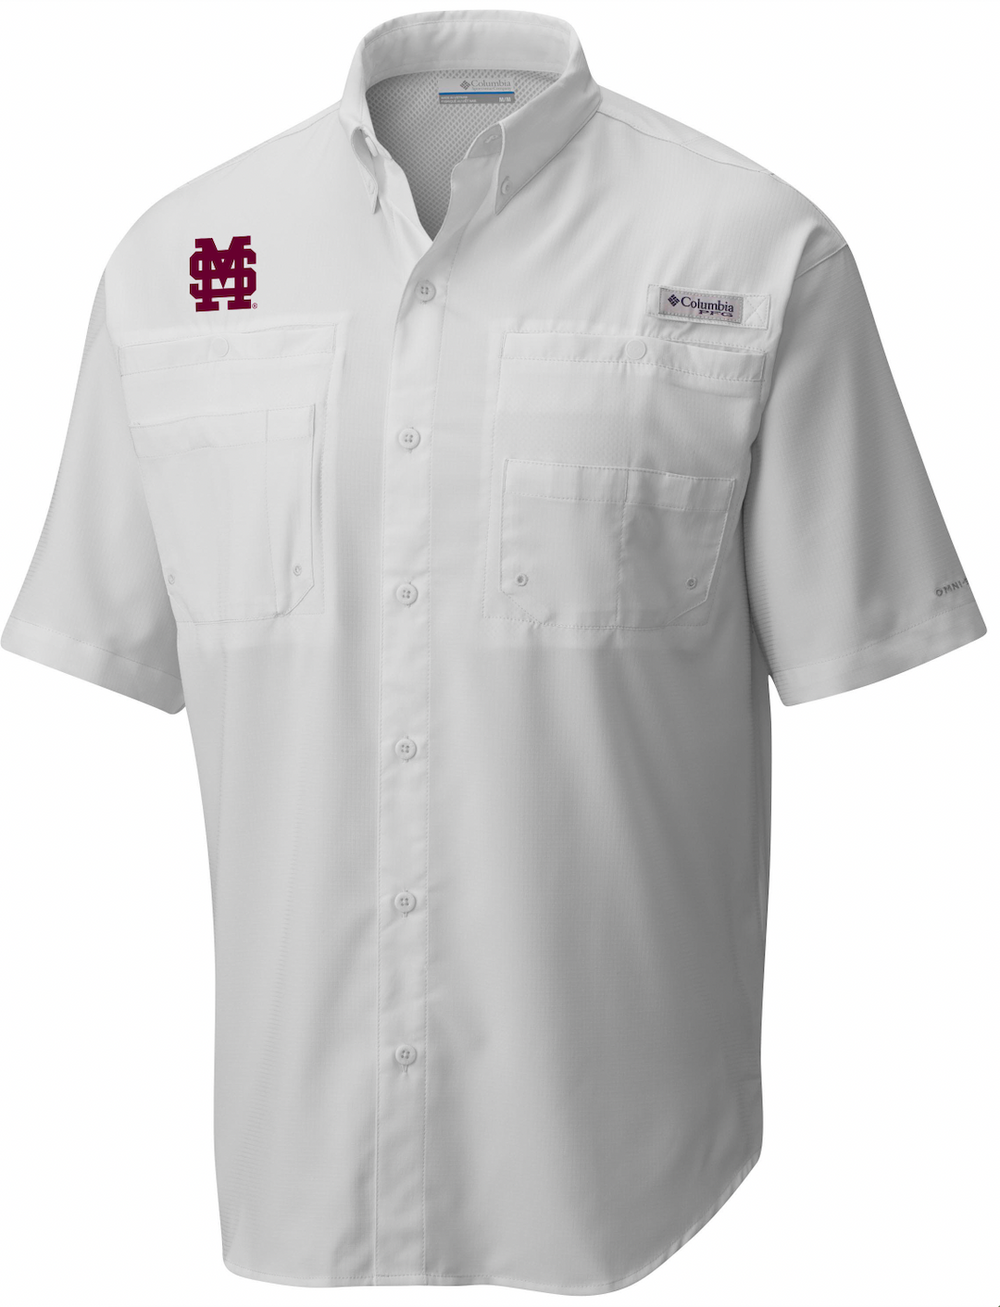 Columbia Men's White Tamiami M over S Button Down Shirt - Mississippi State Edition